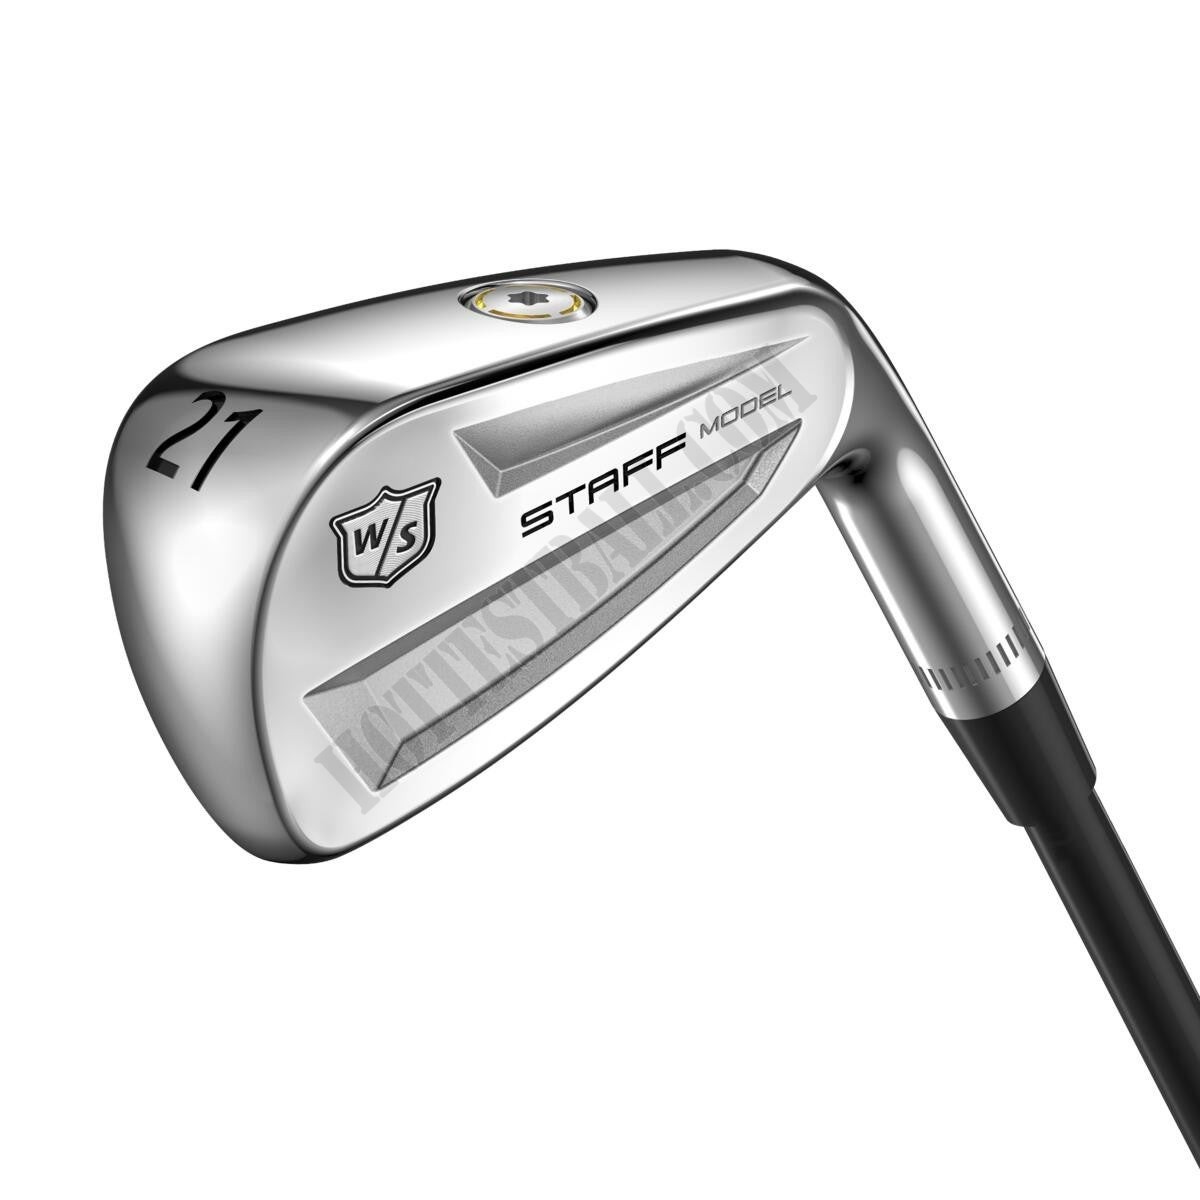 Staff Model Utility Irons - Wilson Discount Store - -0